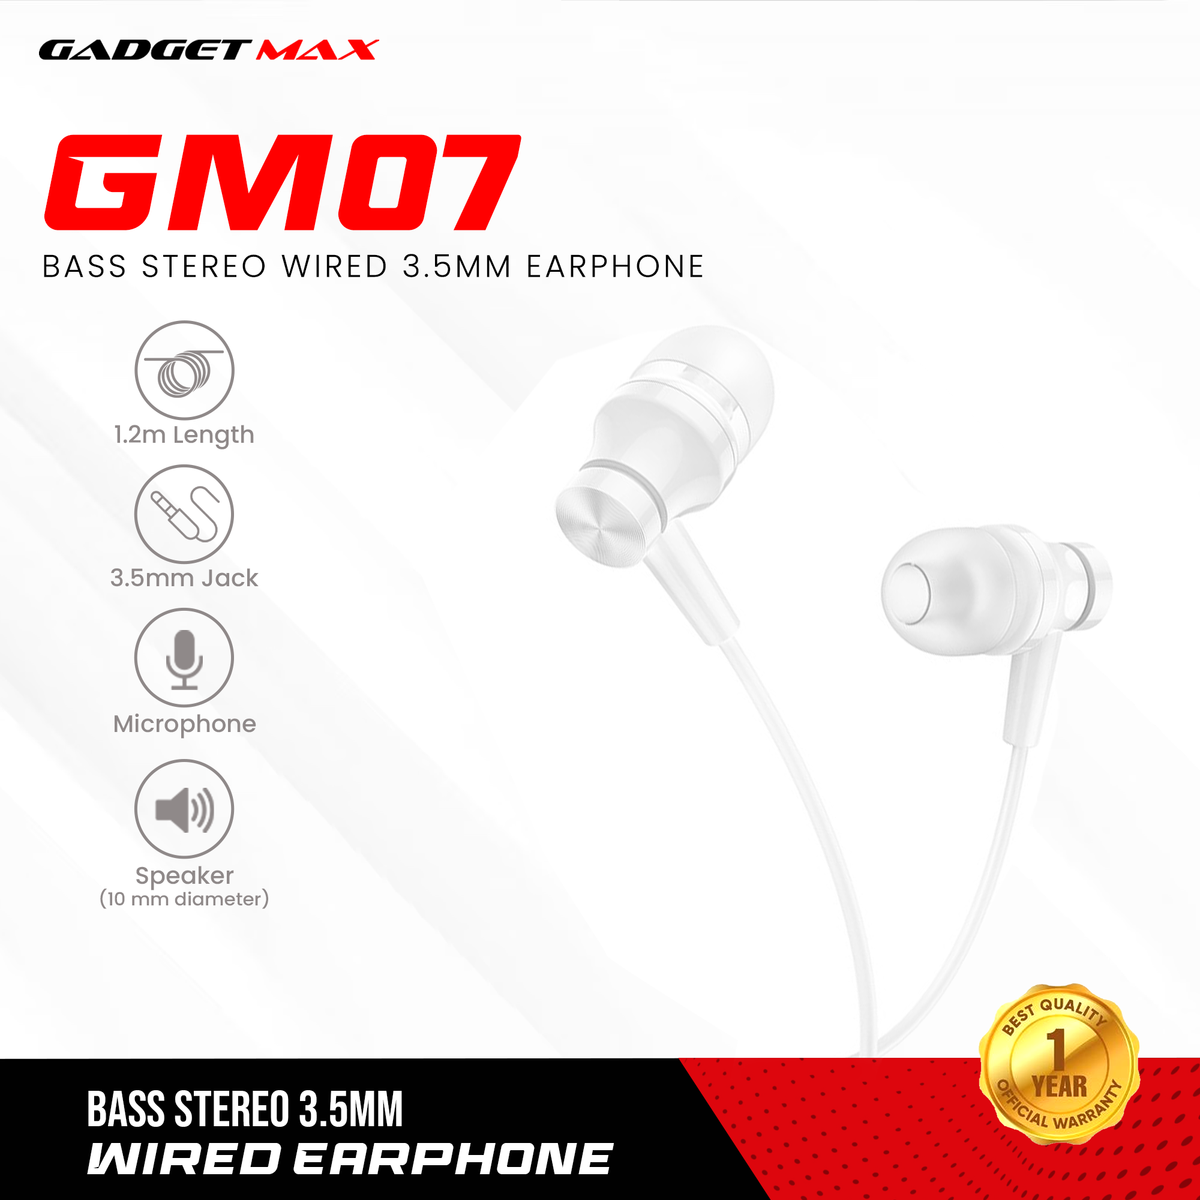 GADGET MAX GM07 BASS STEREO WIRED 3.5MM EARPHONE WITH MIC (1.2M) - WHITE